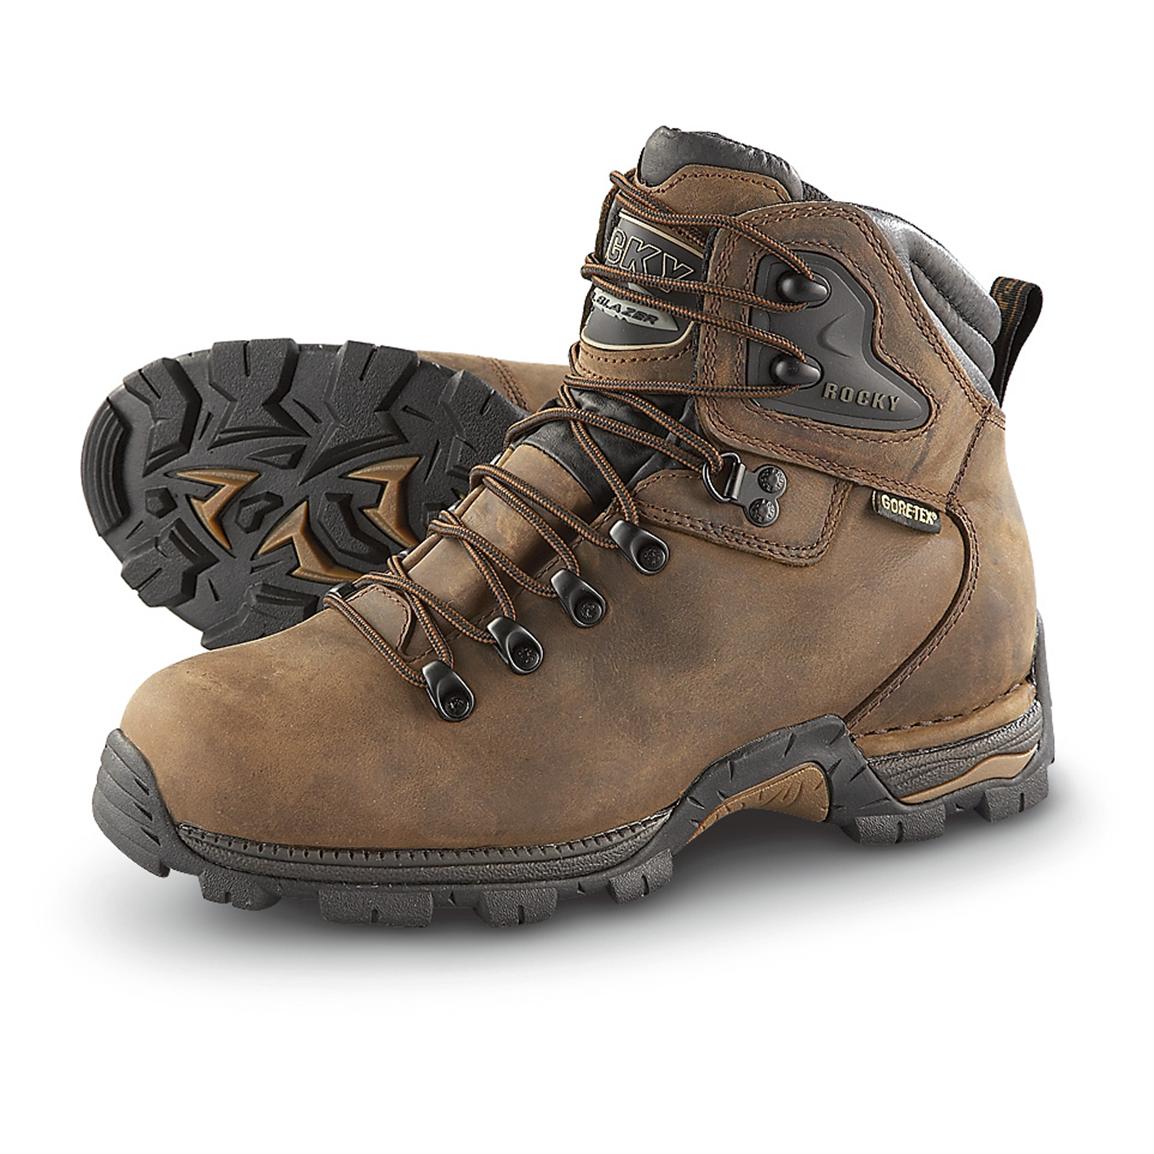 Step into Adventure: The Perfect Hiking Boots for Your Outdoor ...